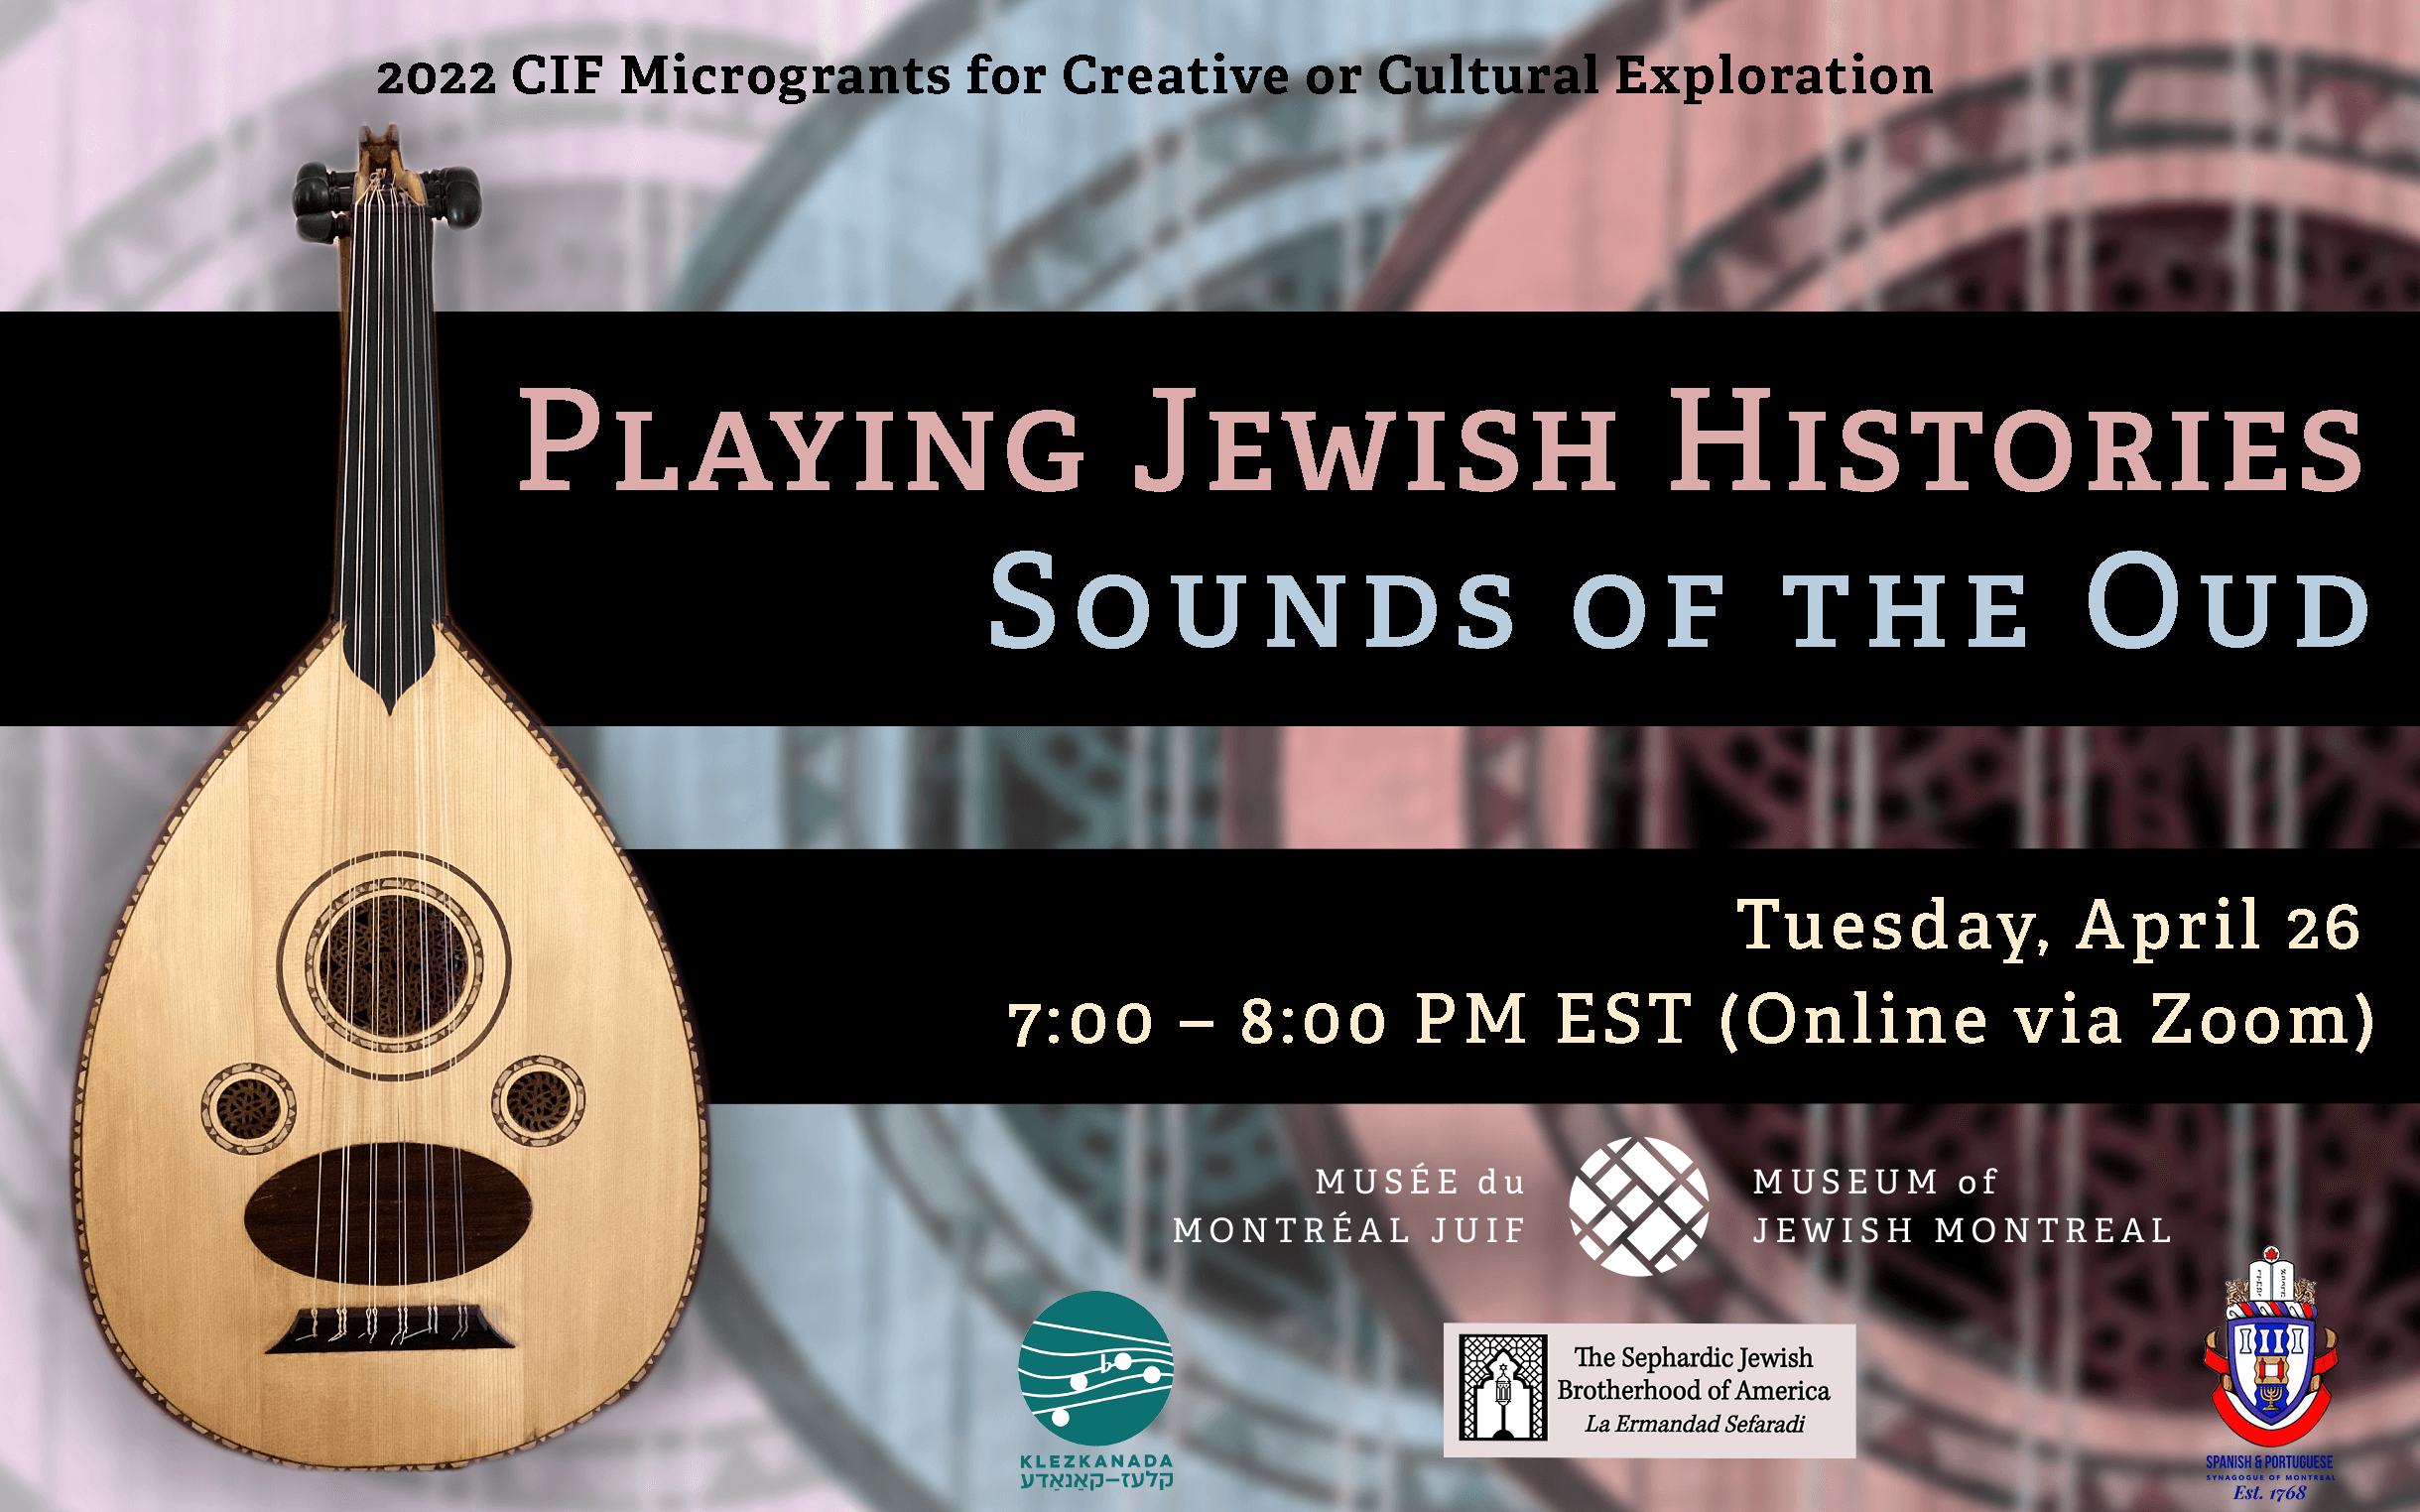 playing jewish histories-sounds of the oud-jlive banner-20220413-145854.png